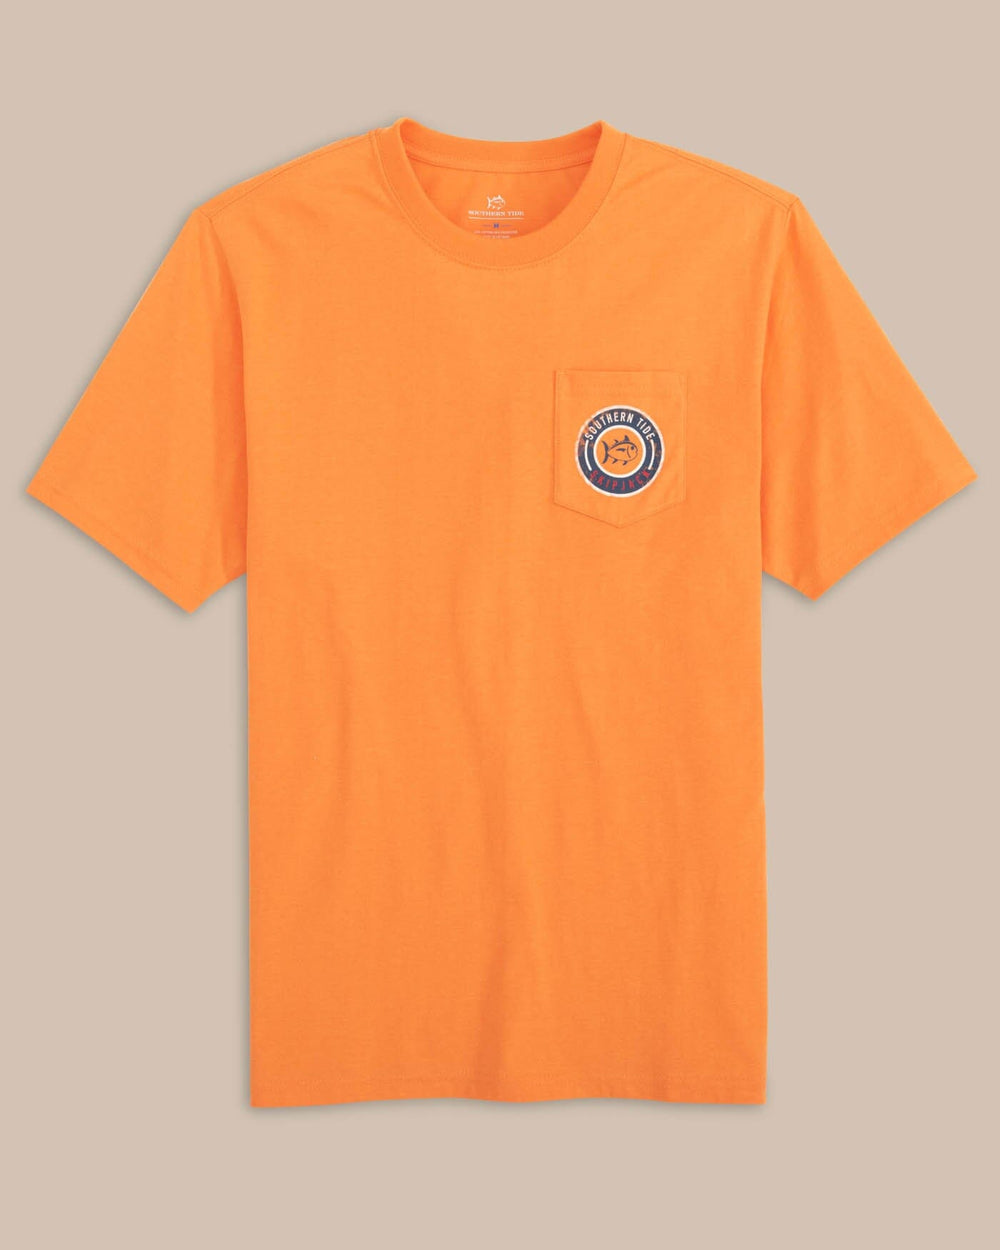 The front view of the Southern Tide ST Circle Short Sleeve T-Shirt by Southern Tide - Tangerine Orange